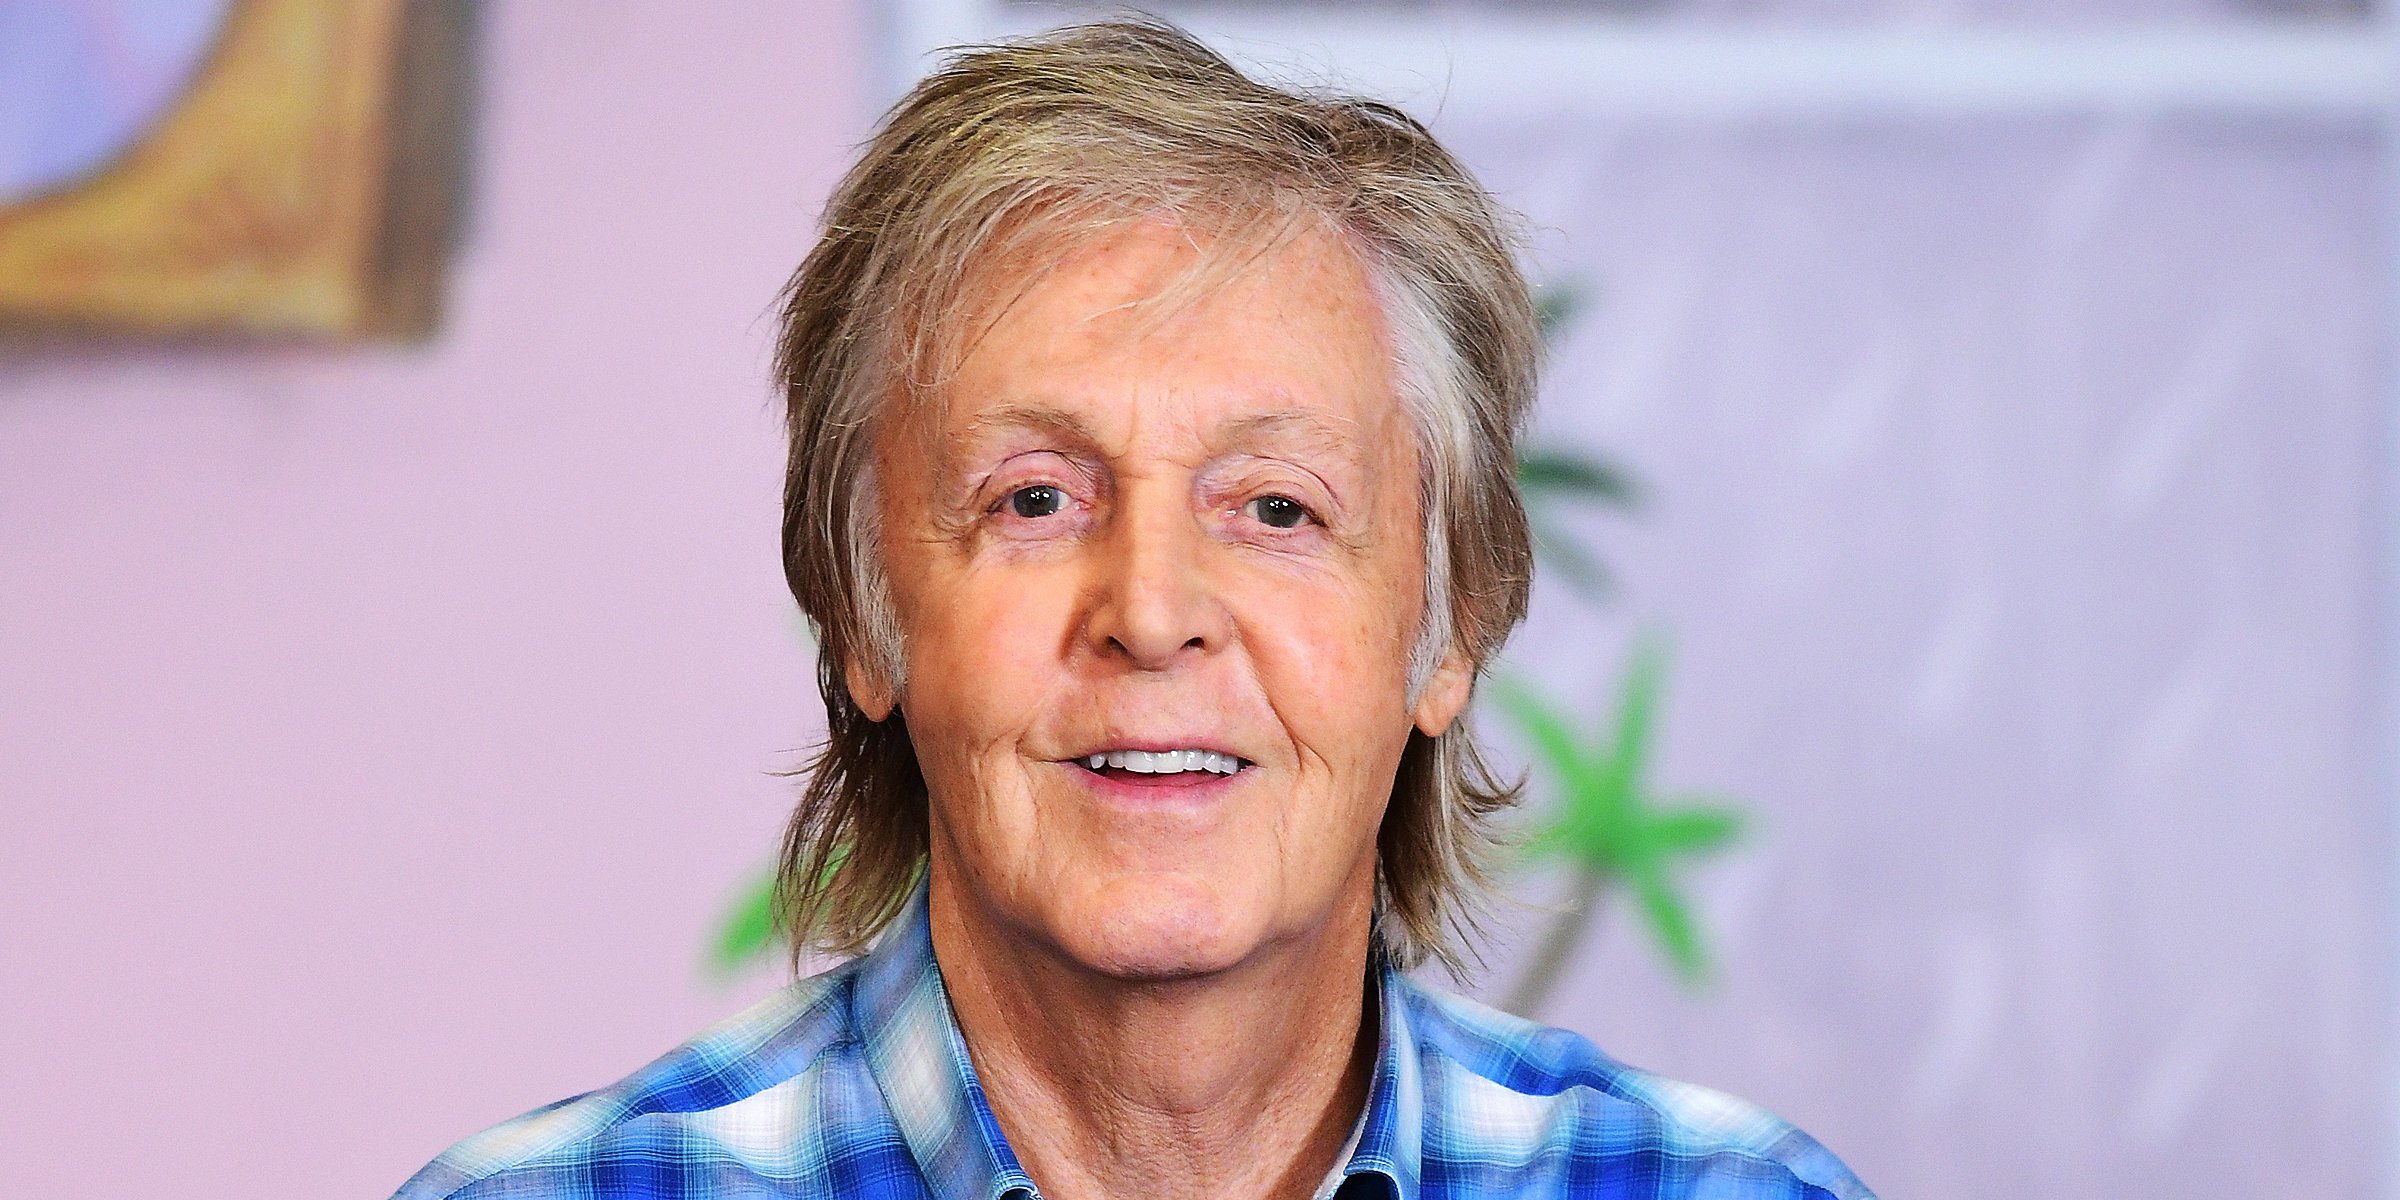 Paul McCartney, 2019 | Source: Getty Images